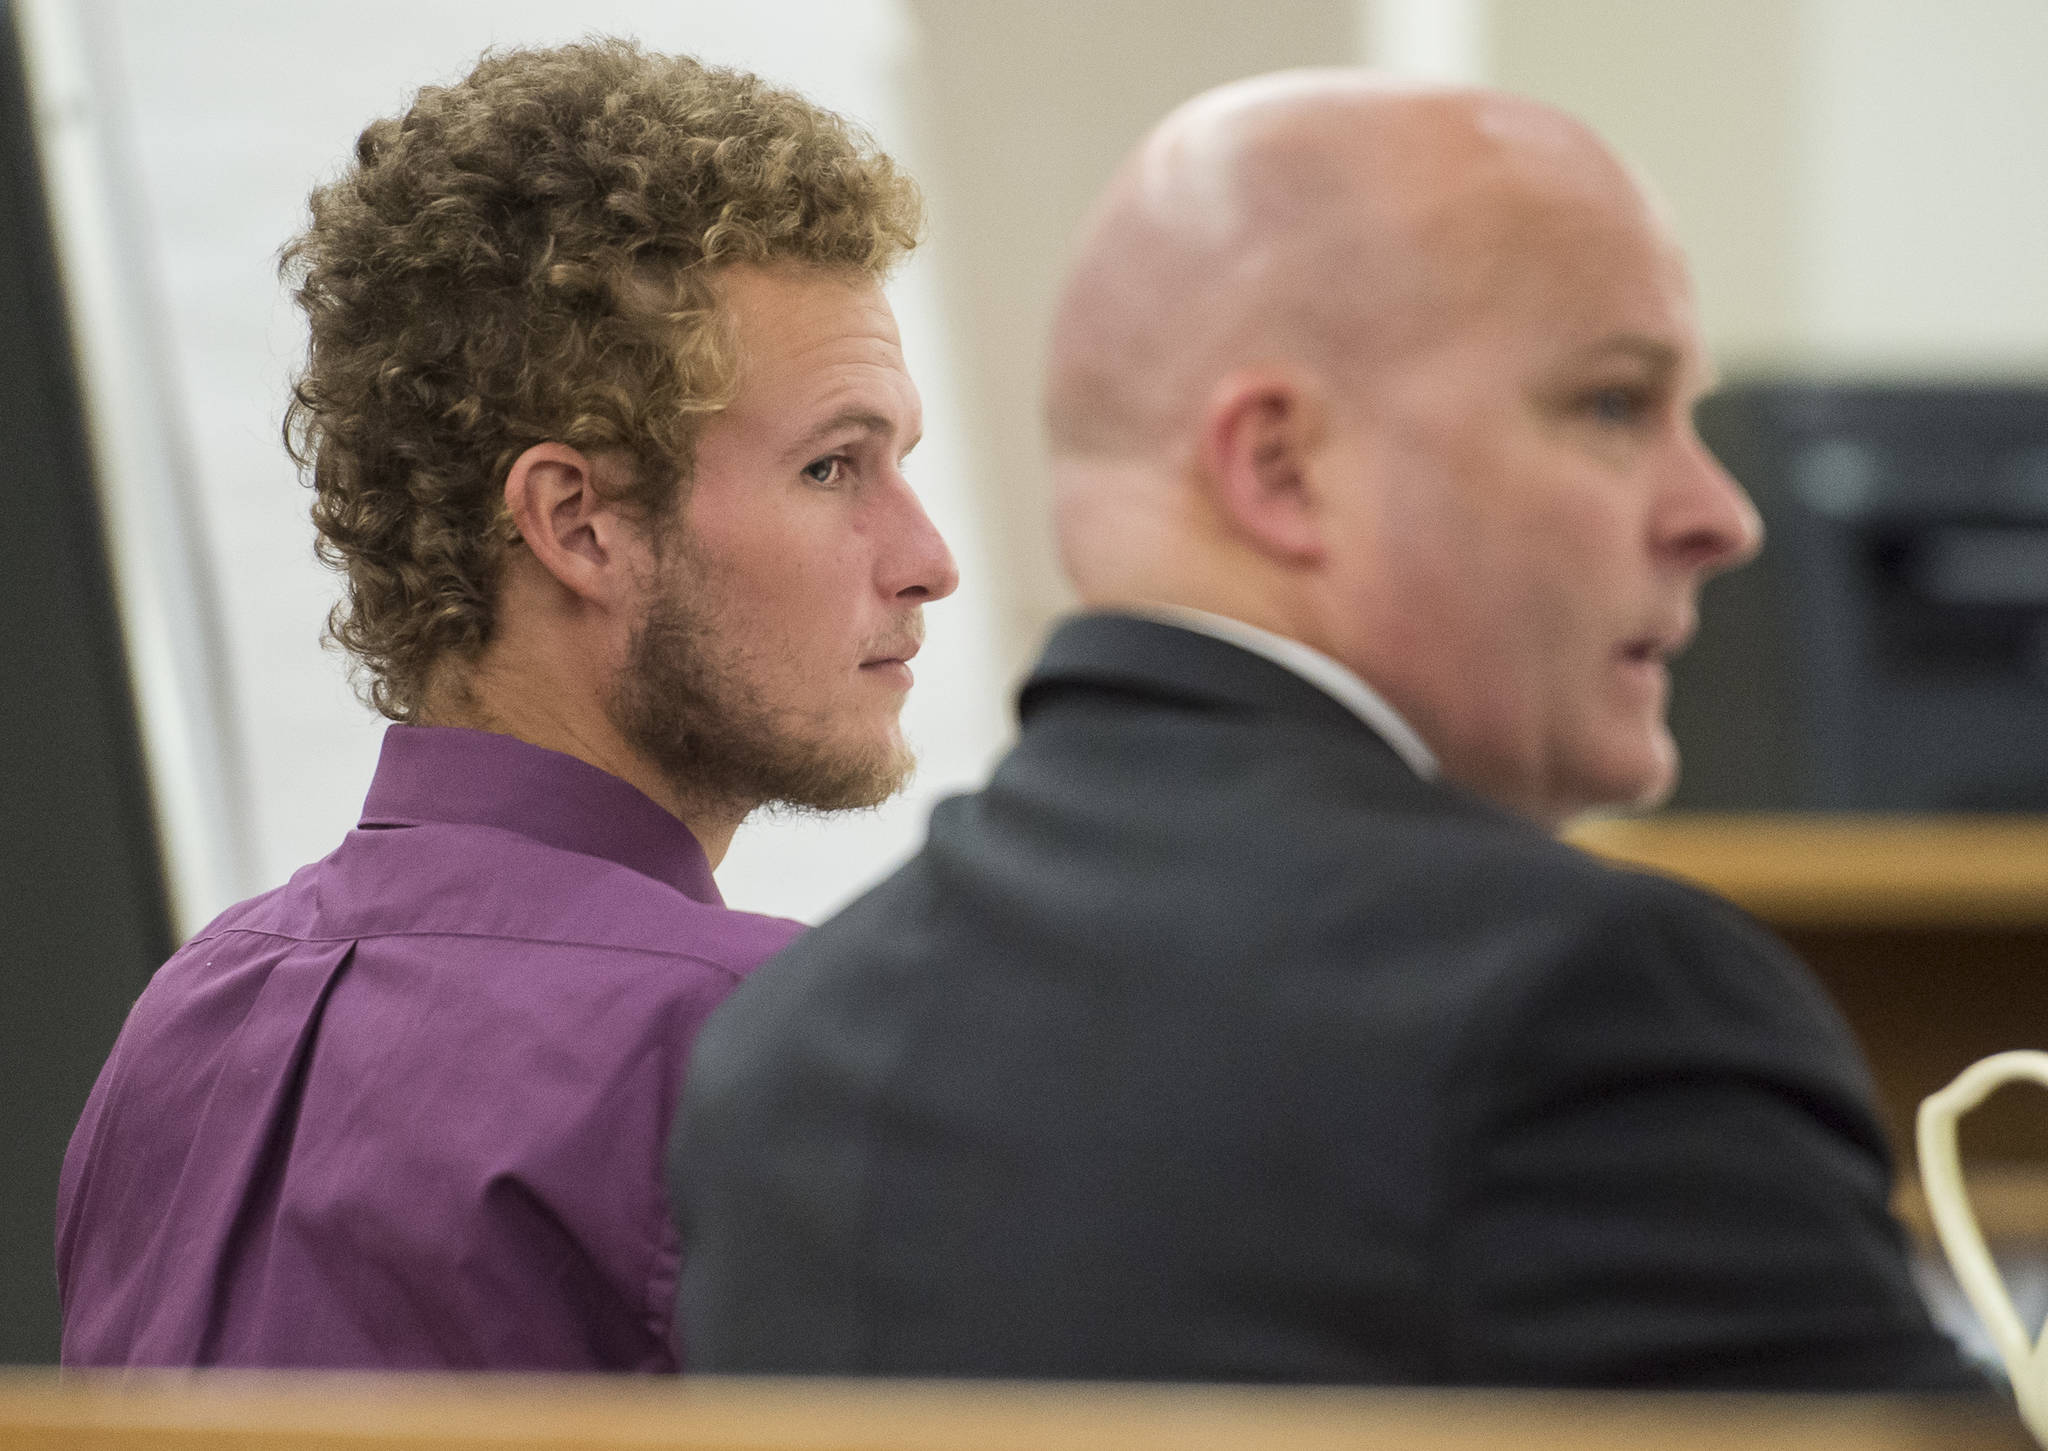 Ty Grussendorf, 24, left, appears in Juneau Superior Court with his attorney, John P. Cashion, to plead guilty to two counts of sexual abuse of a minor on Monday, Oct. 22, 2018. (Michael Penn | Juneau Empire)